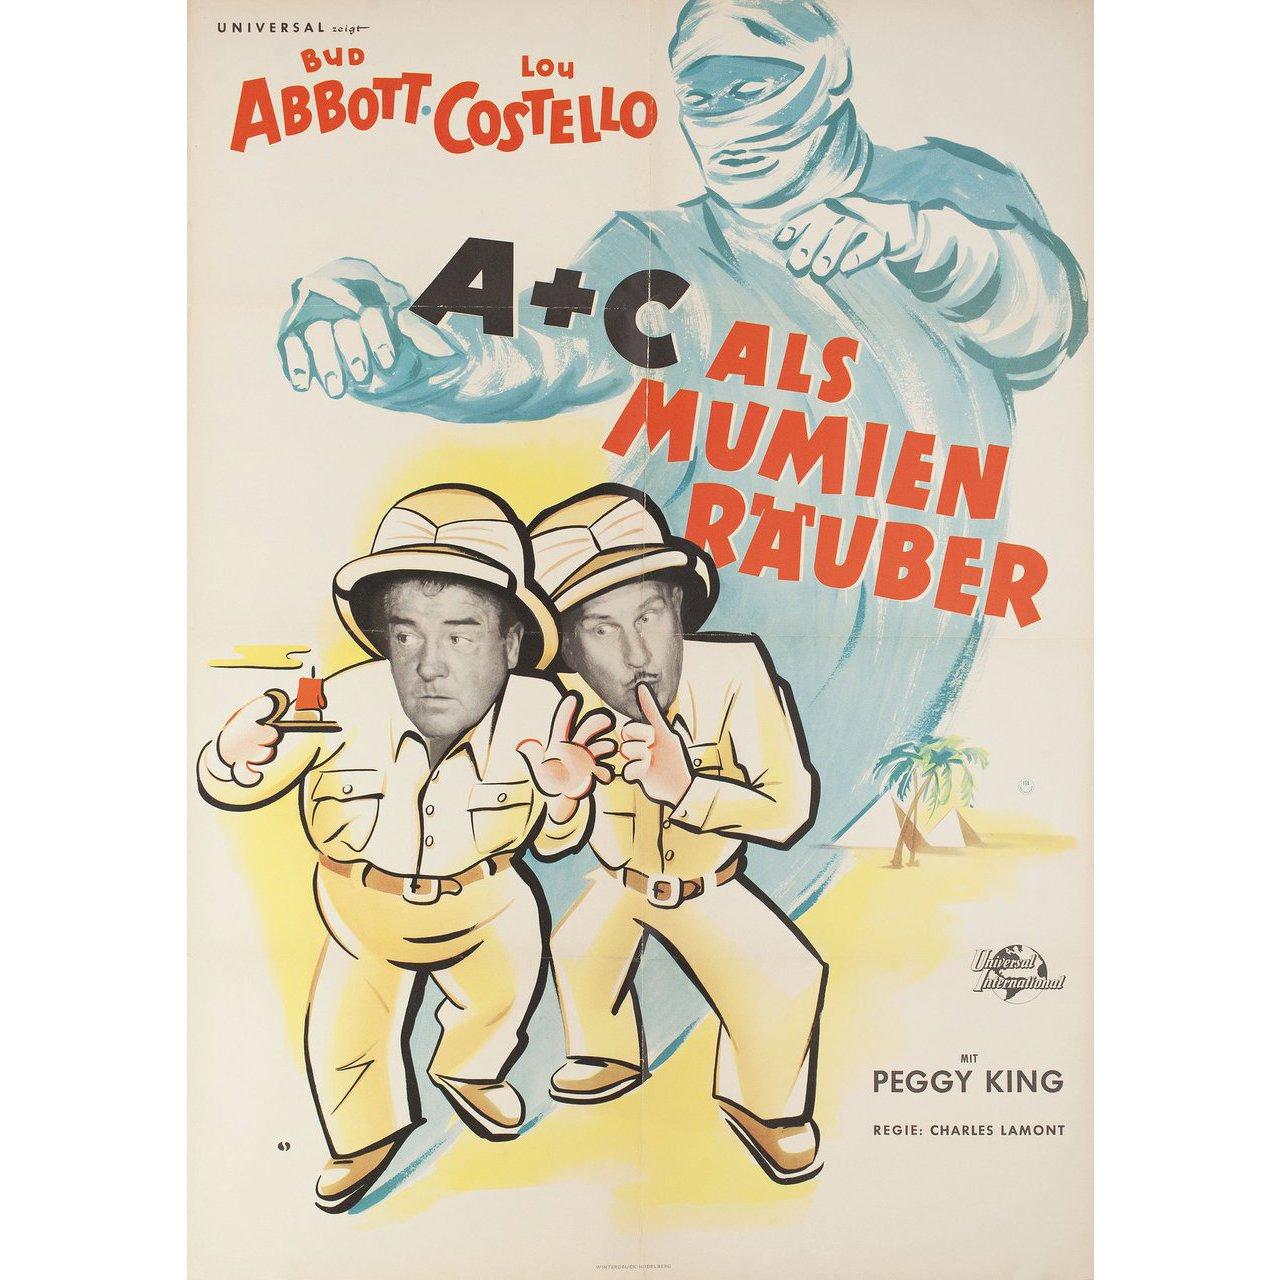 Original 1955 German A1 poster for the film Abbott and Costello Meet the Mummy directed by Charles Lamont with Bud Abbott / Lou Costello / Marie Windsor / Michael Ansara. Very Good condition, folded with tape repairs on rear. Many original posters